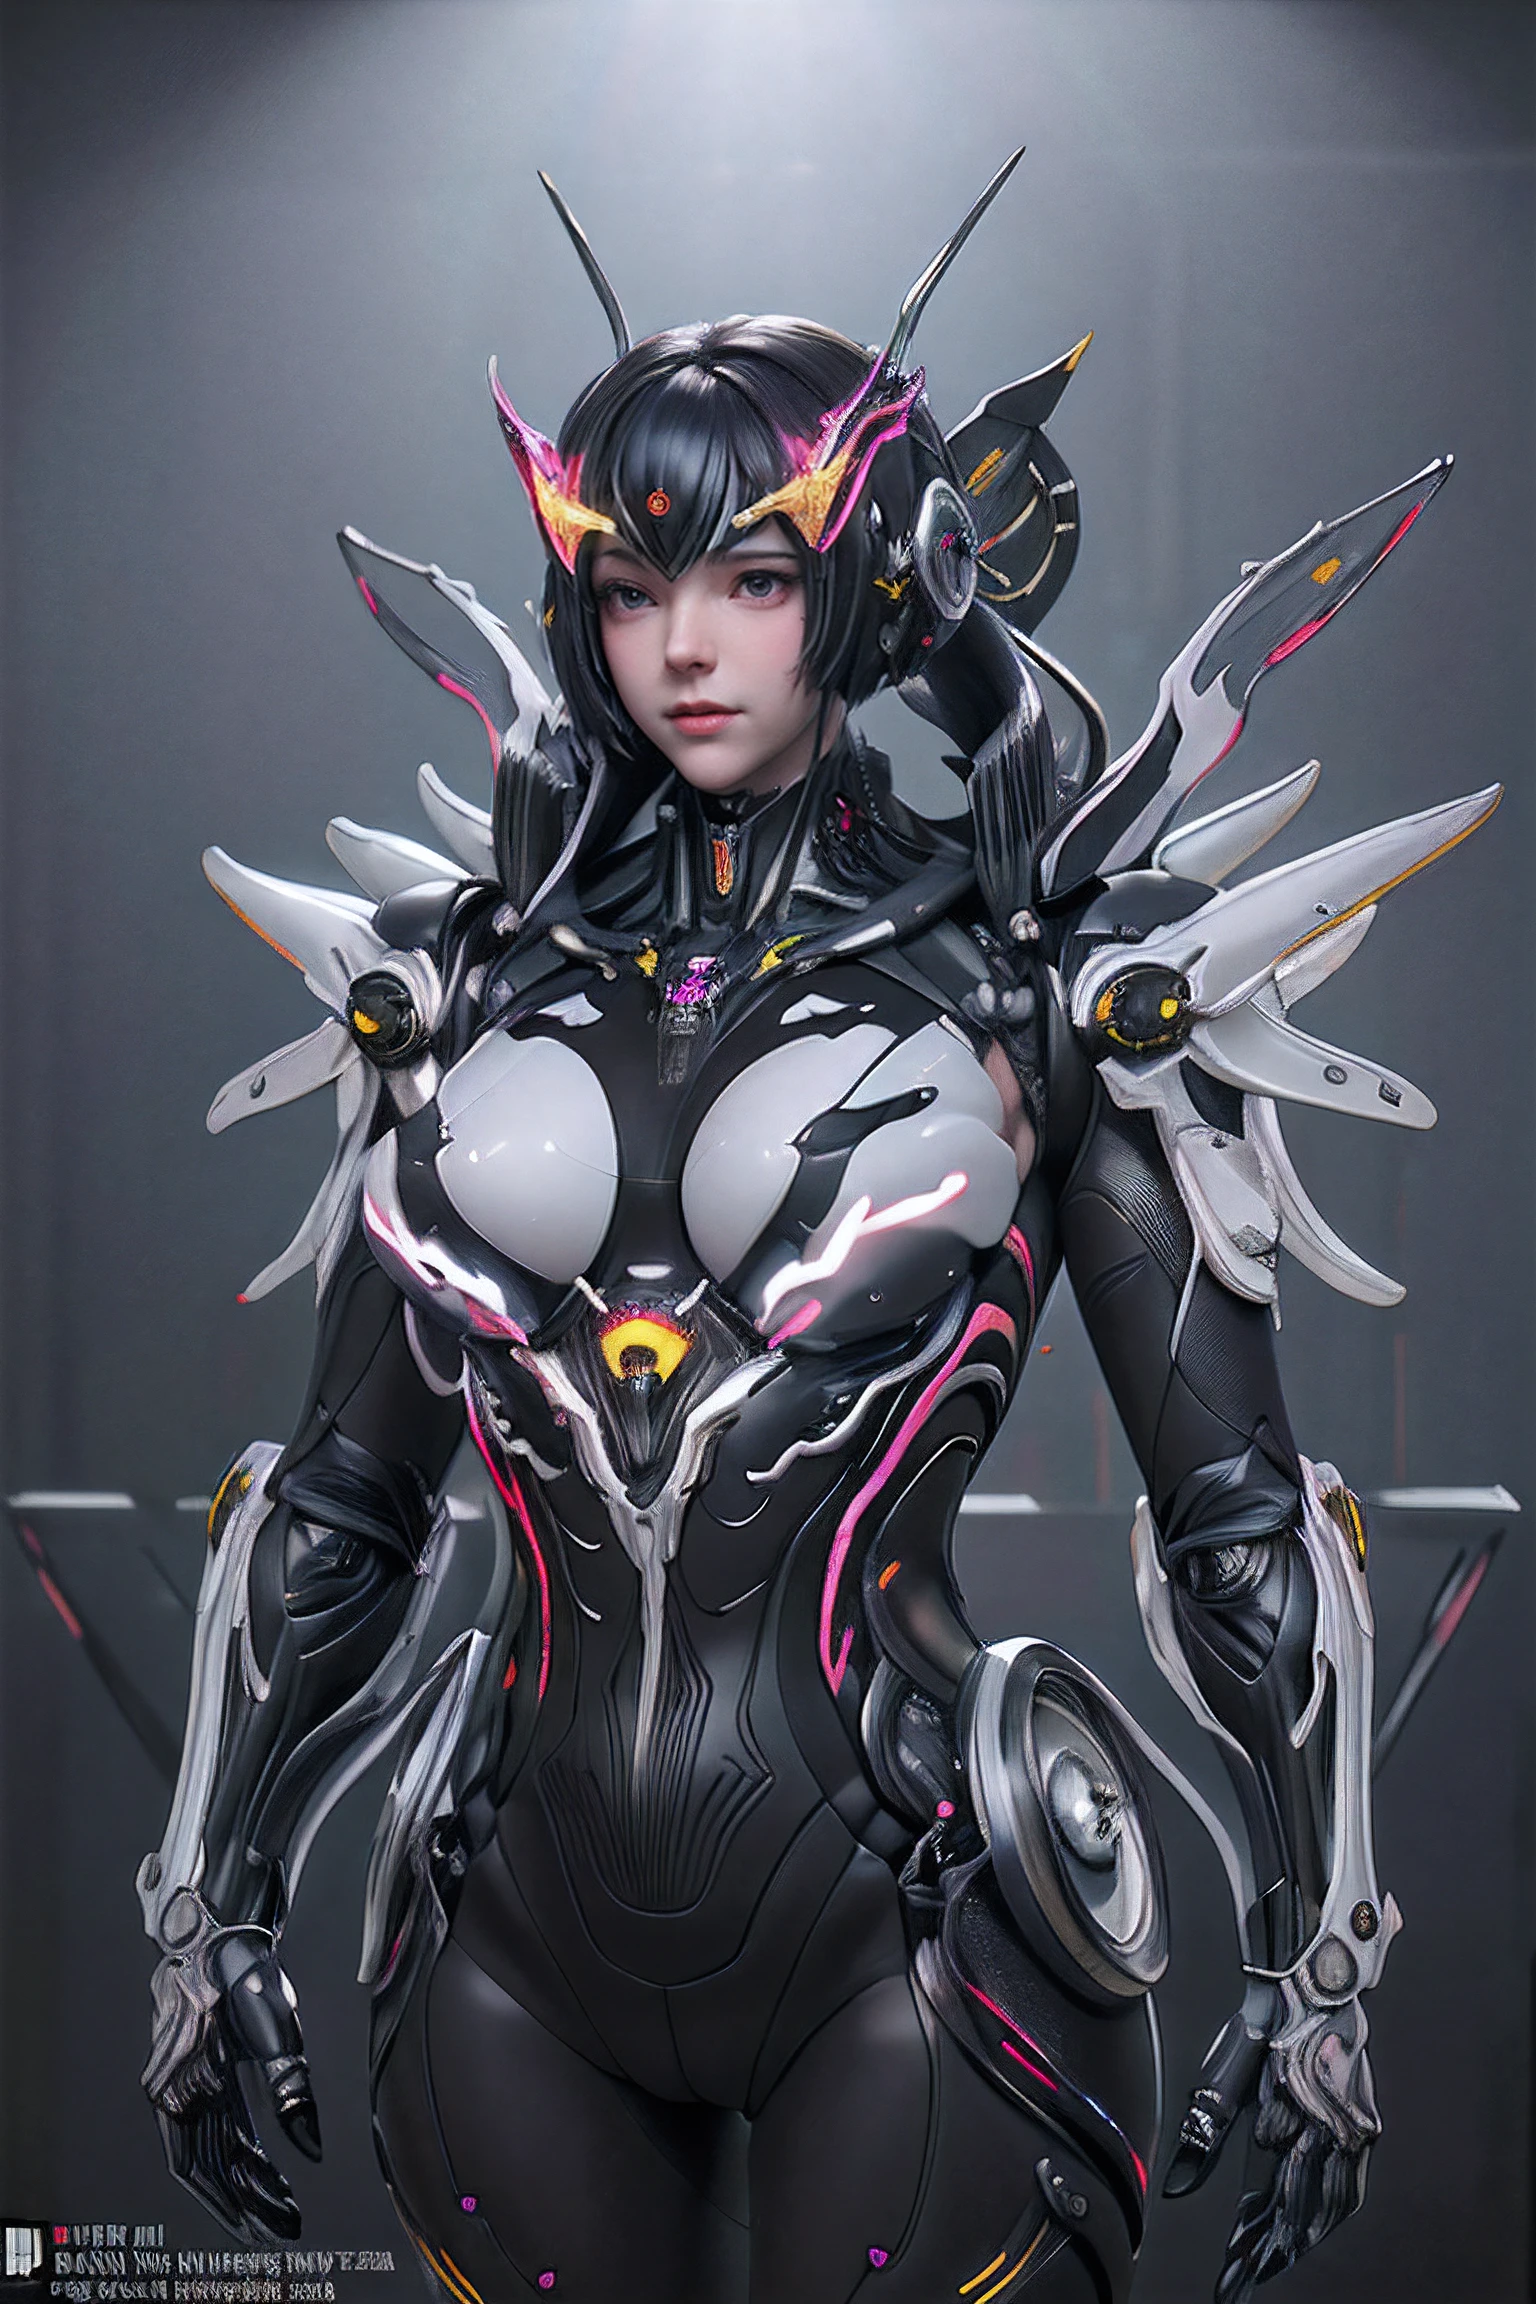 upper body,solo,[:(black background:1.5):90],Gradient background,1mechanical girl,(1kaijin:1.2),curvy,machine made joints,machanical limbs,blood vessels connected to tubes,mechanical vertebra attaching to back,mechanical cervial attaching to neck,lights on armor,mecha headglass,Luminous Arms,laser eyes,expressionless,glowing skin,dynamic angle,
(colorful:1.2),outline,watercolor,hdr,ray tracing,nvidia rtx,subsurface scattering,pbr texturing,post-processing,anisotropic filtering,depth of field,maximum clarity and sharpness,16k raw,luminescent particles,cinematic lighting,lens flare,dramatic_shadow,fantasy,chromatic aberration, intricate details